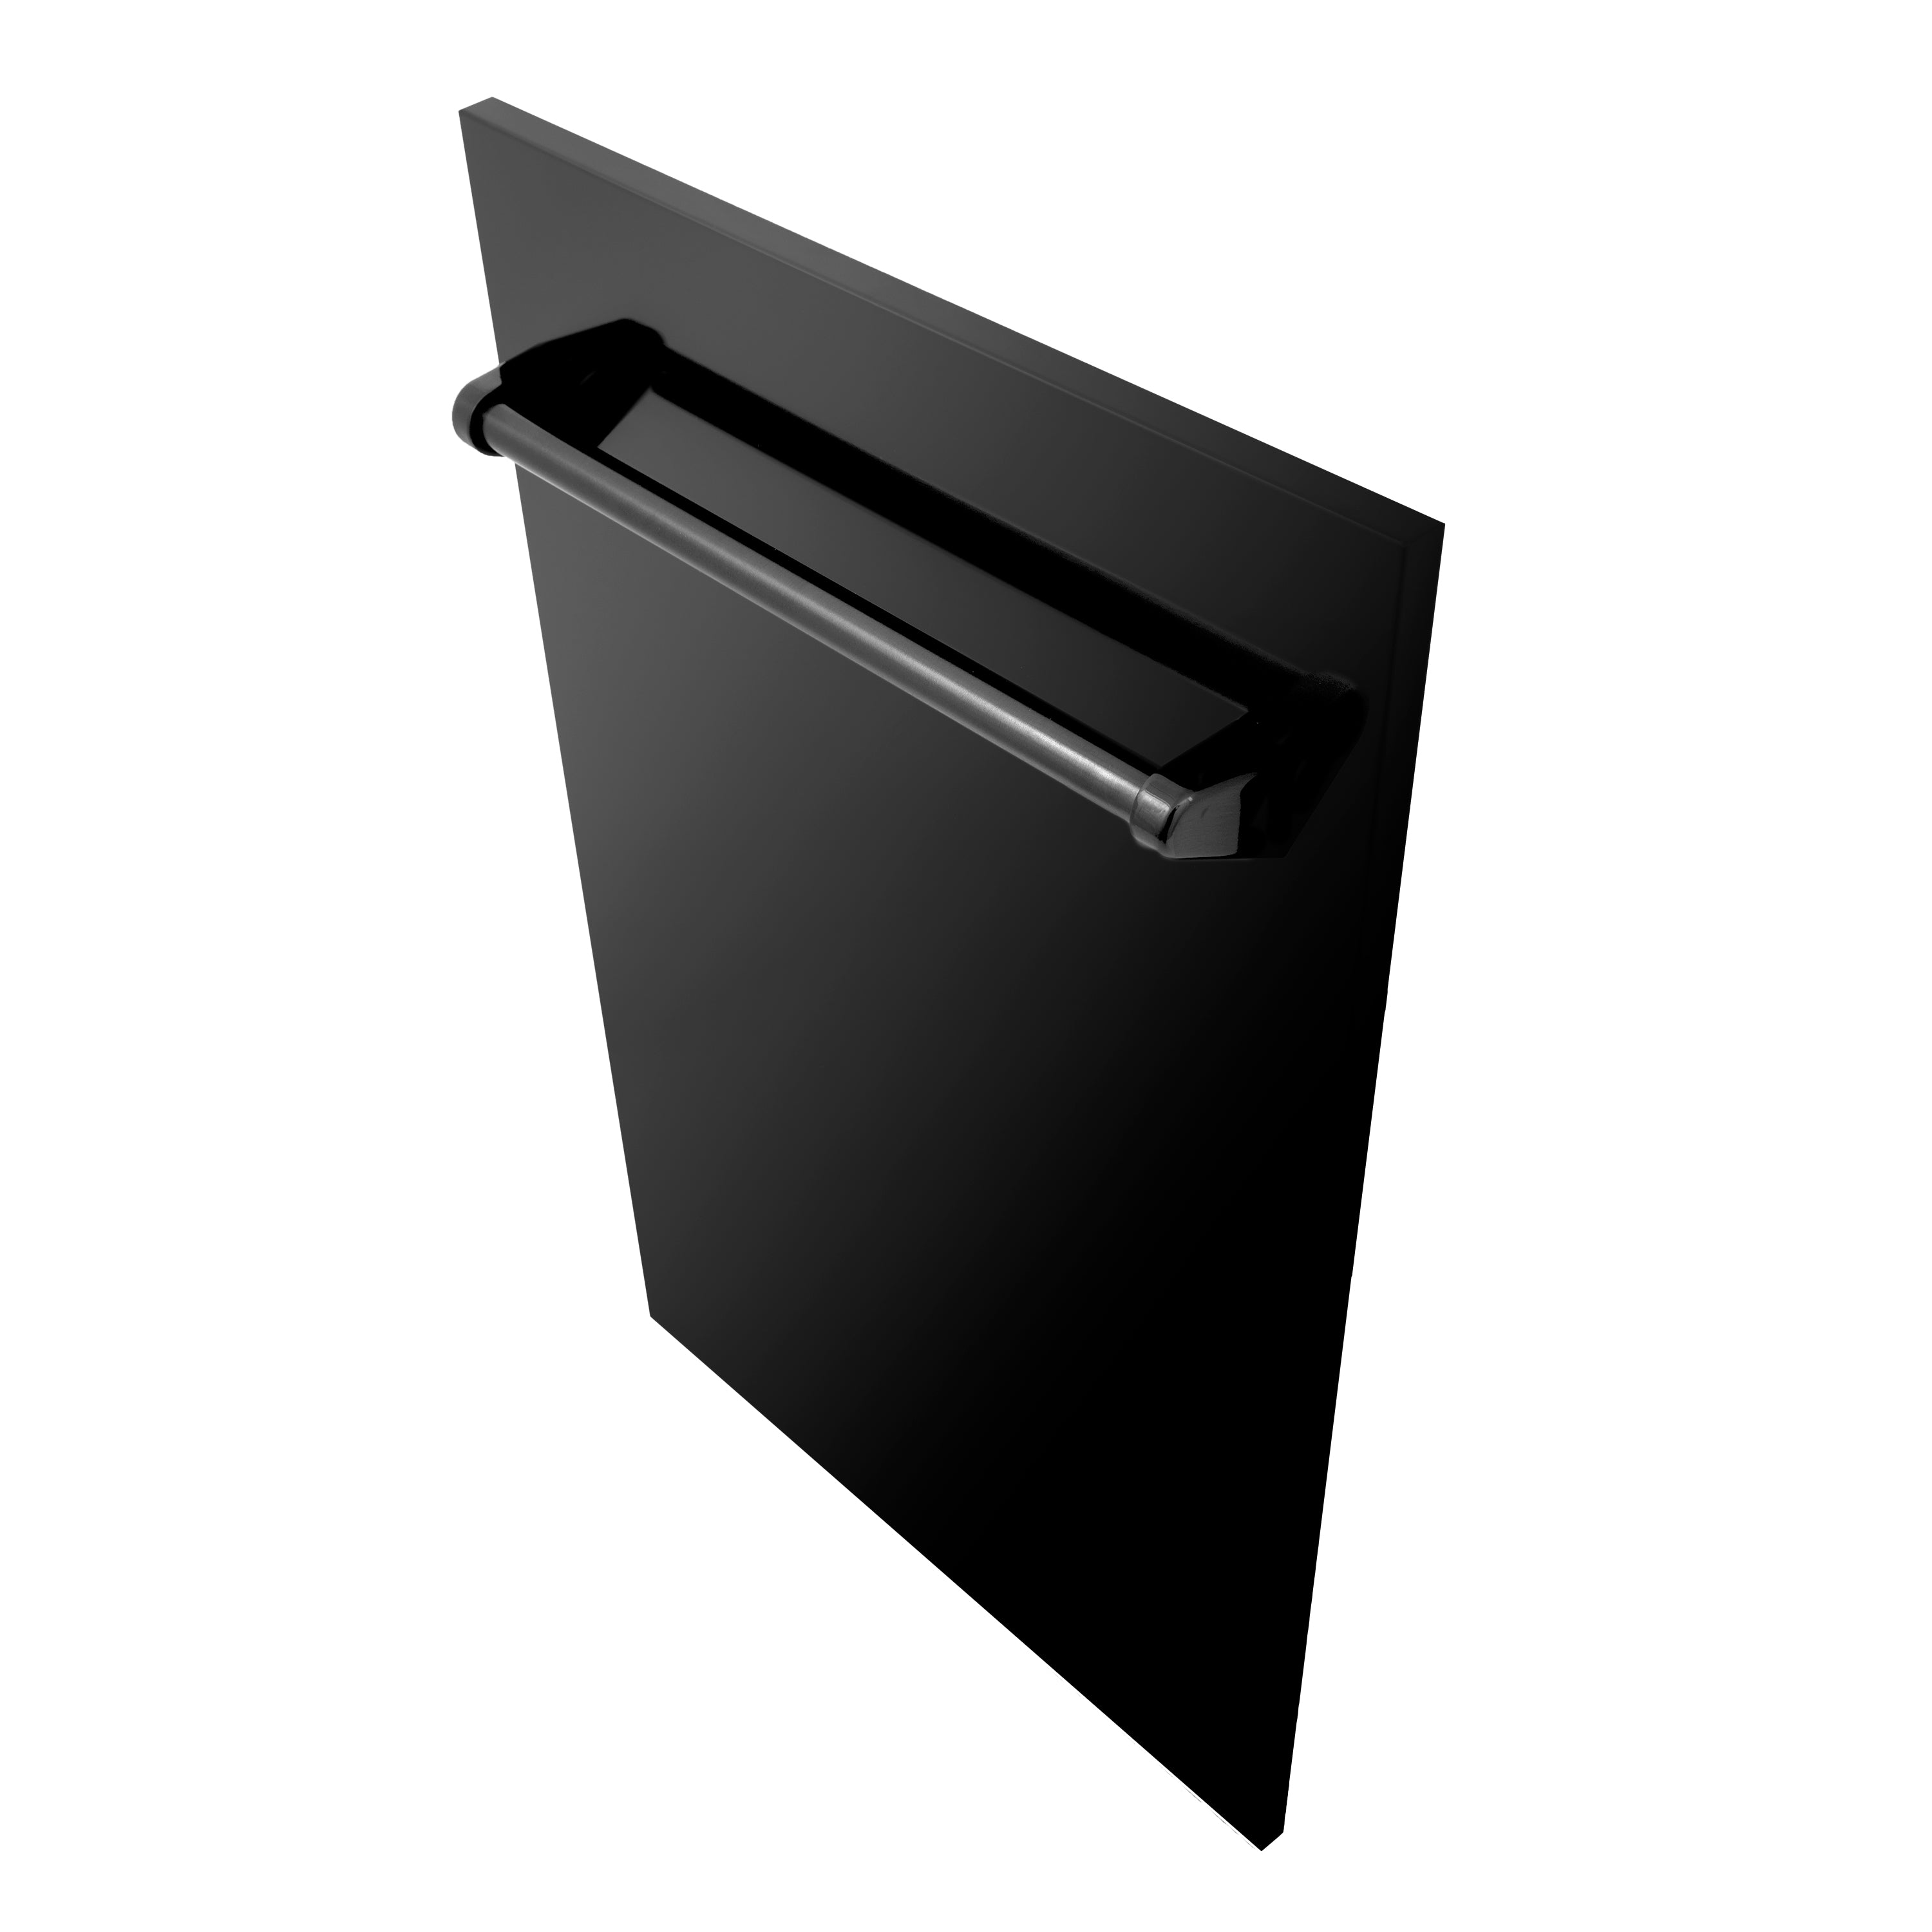 ZLINE 18" Tallac Dishwasher Panel in Black Stainless Steel with Traditional Handle (DPV-BS-18)